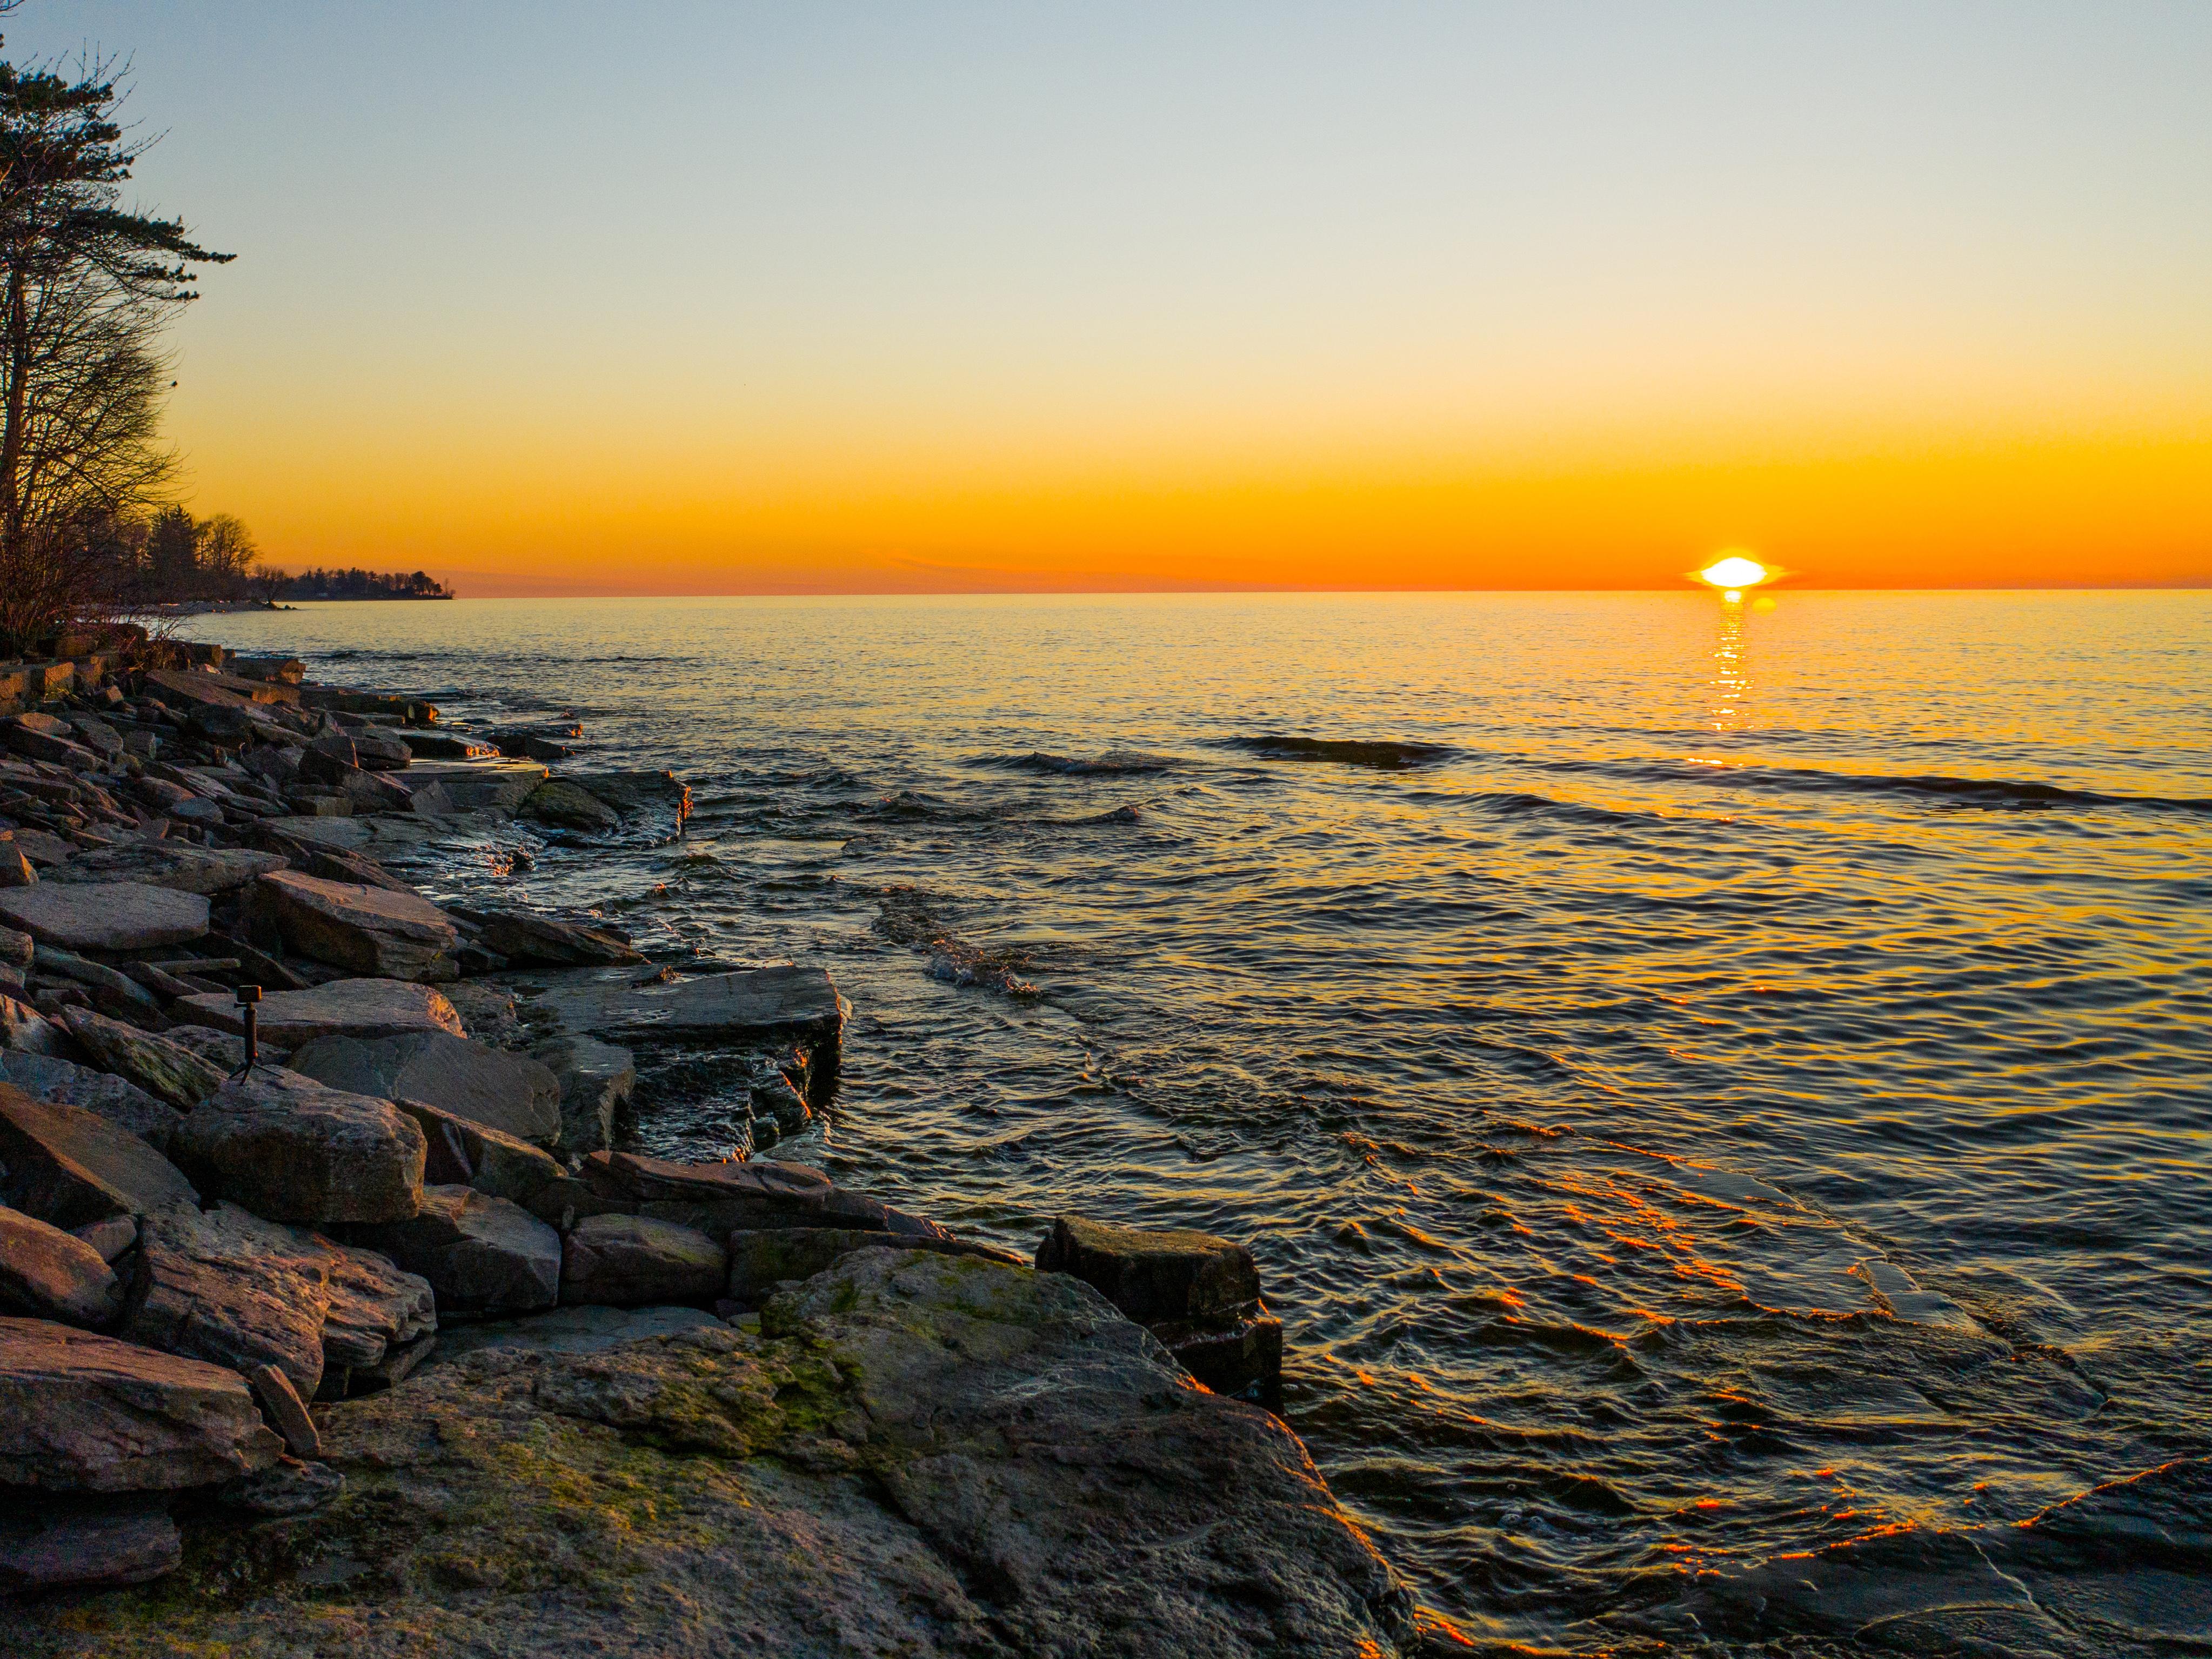 A Lake Ontario sunset paints a variety of hues across the sky